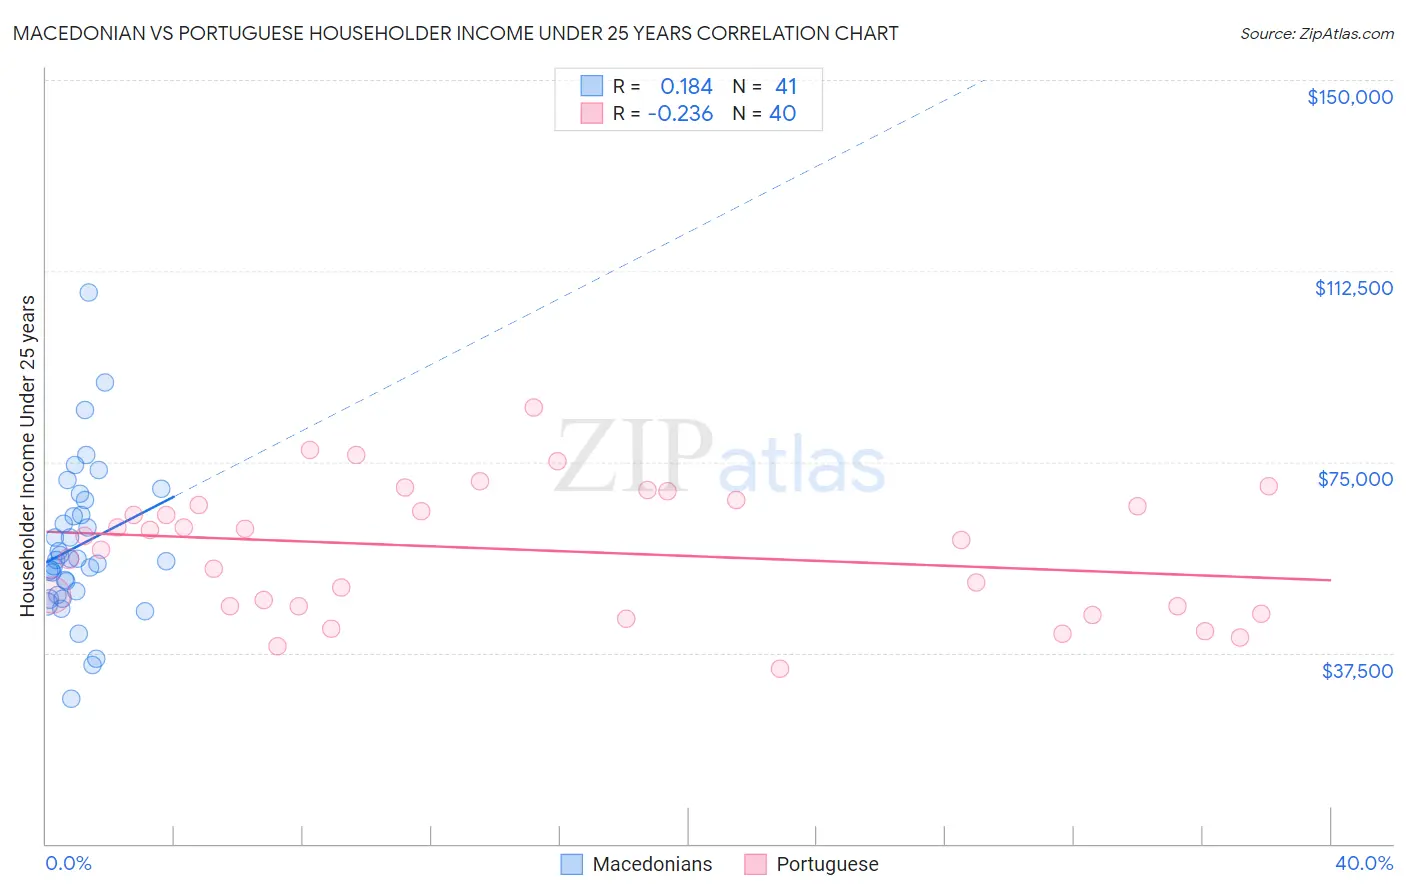 Macedonian vs Portuguese Householder Income Under 25 years